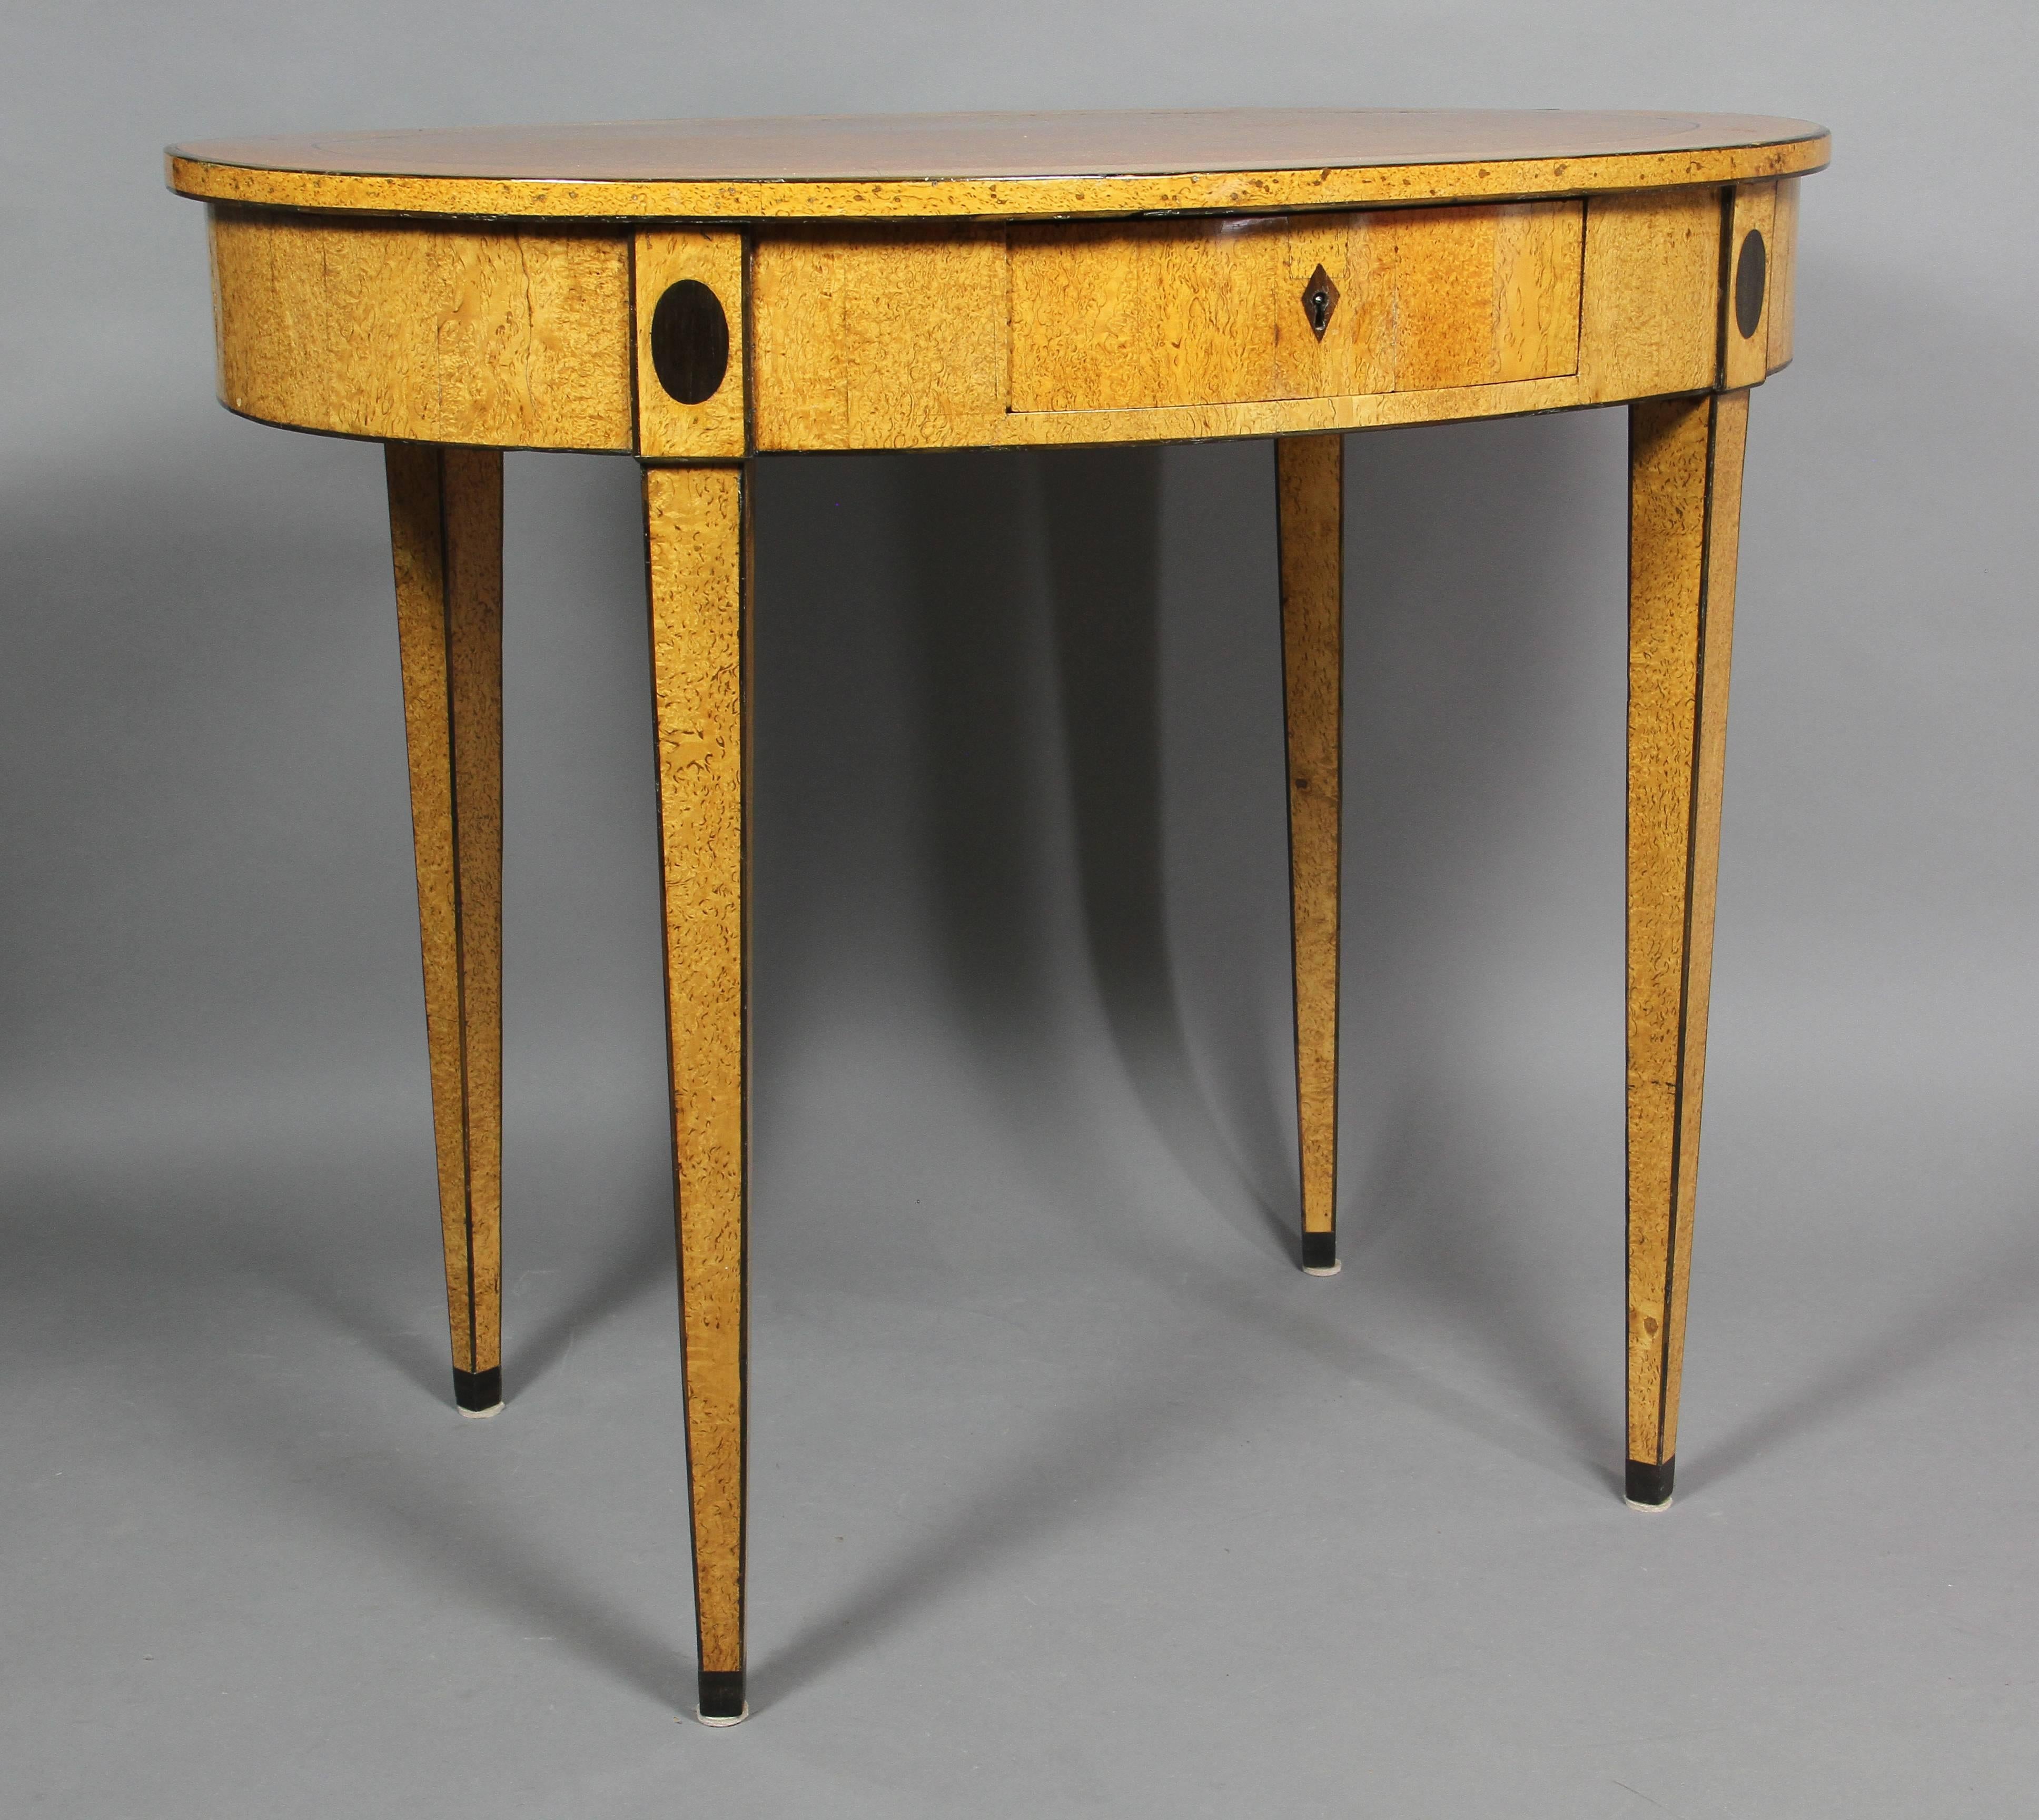 Oval top over a drawer with diamond shape escutcheon and flanked by oval inlays raised on square tapered legs. Provenance: Bernd Goeckler, New York.